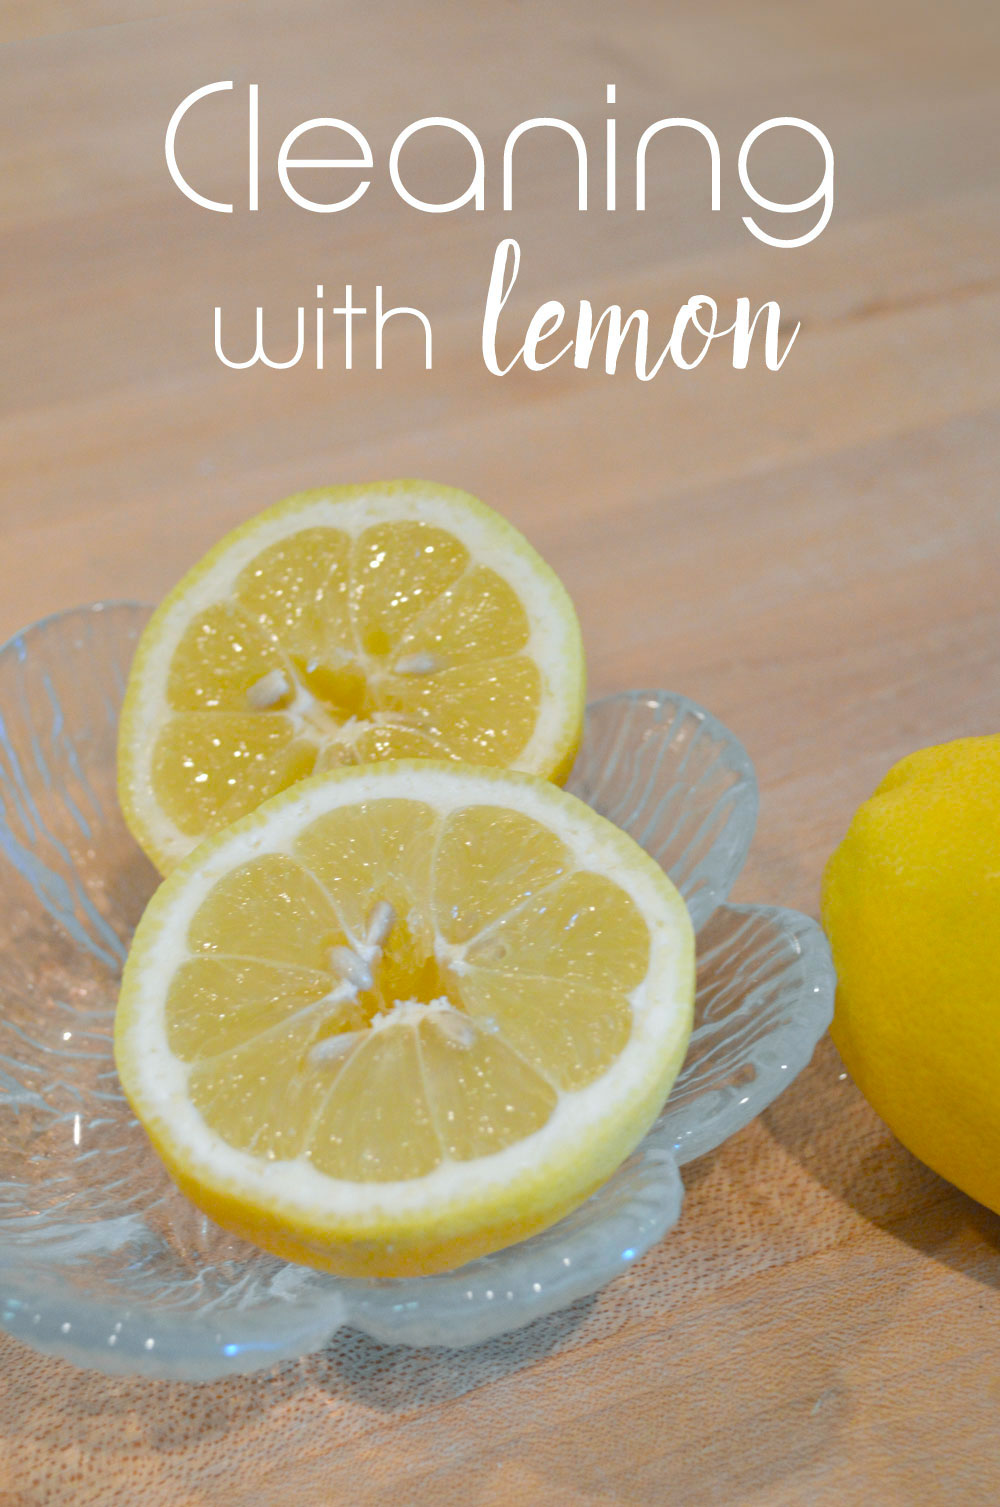 Cleaning with lemon natural kitchen degreasing tips - Mommy Scene